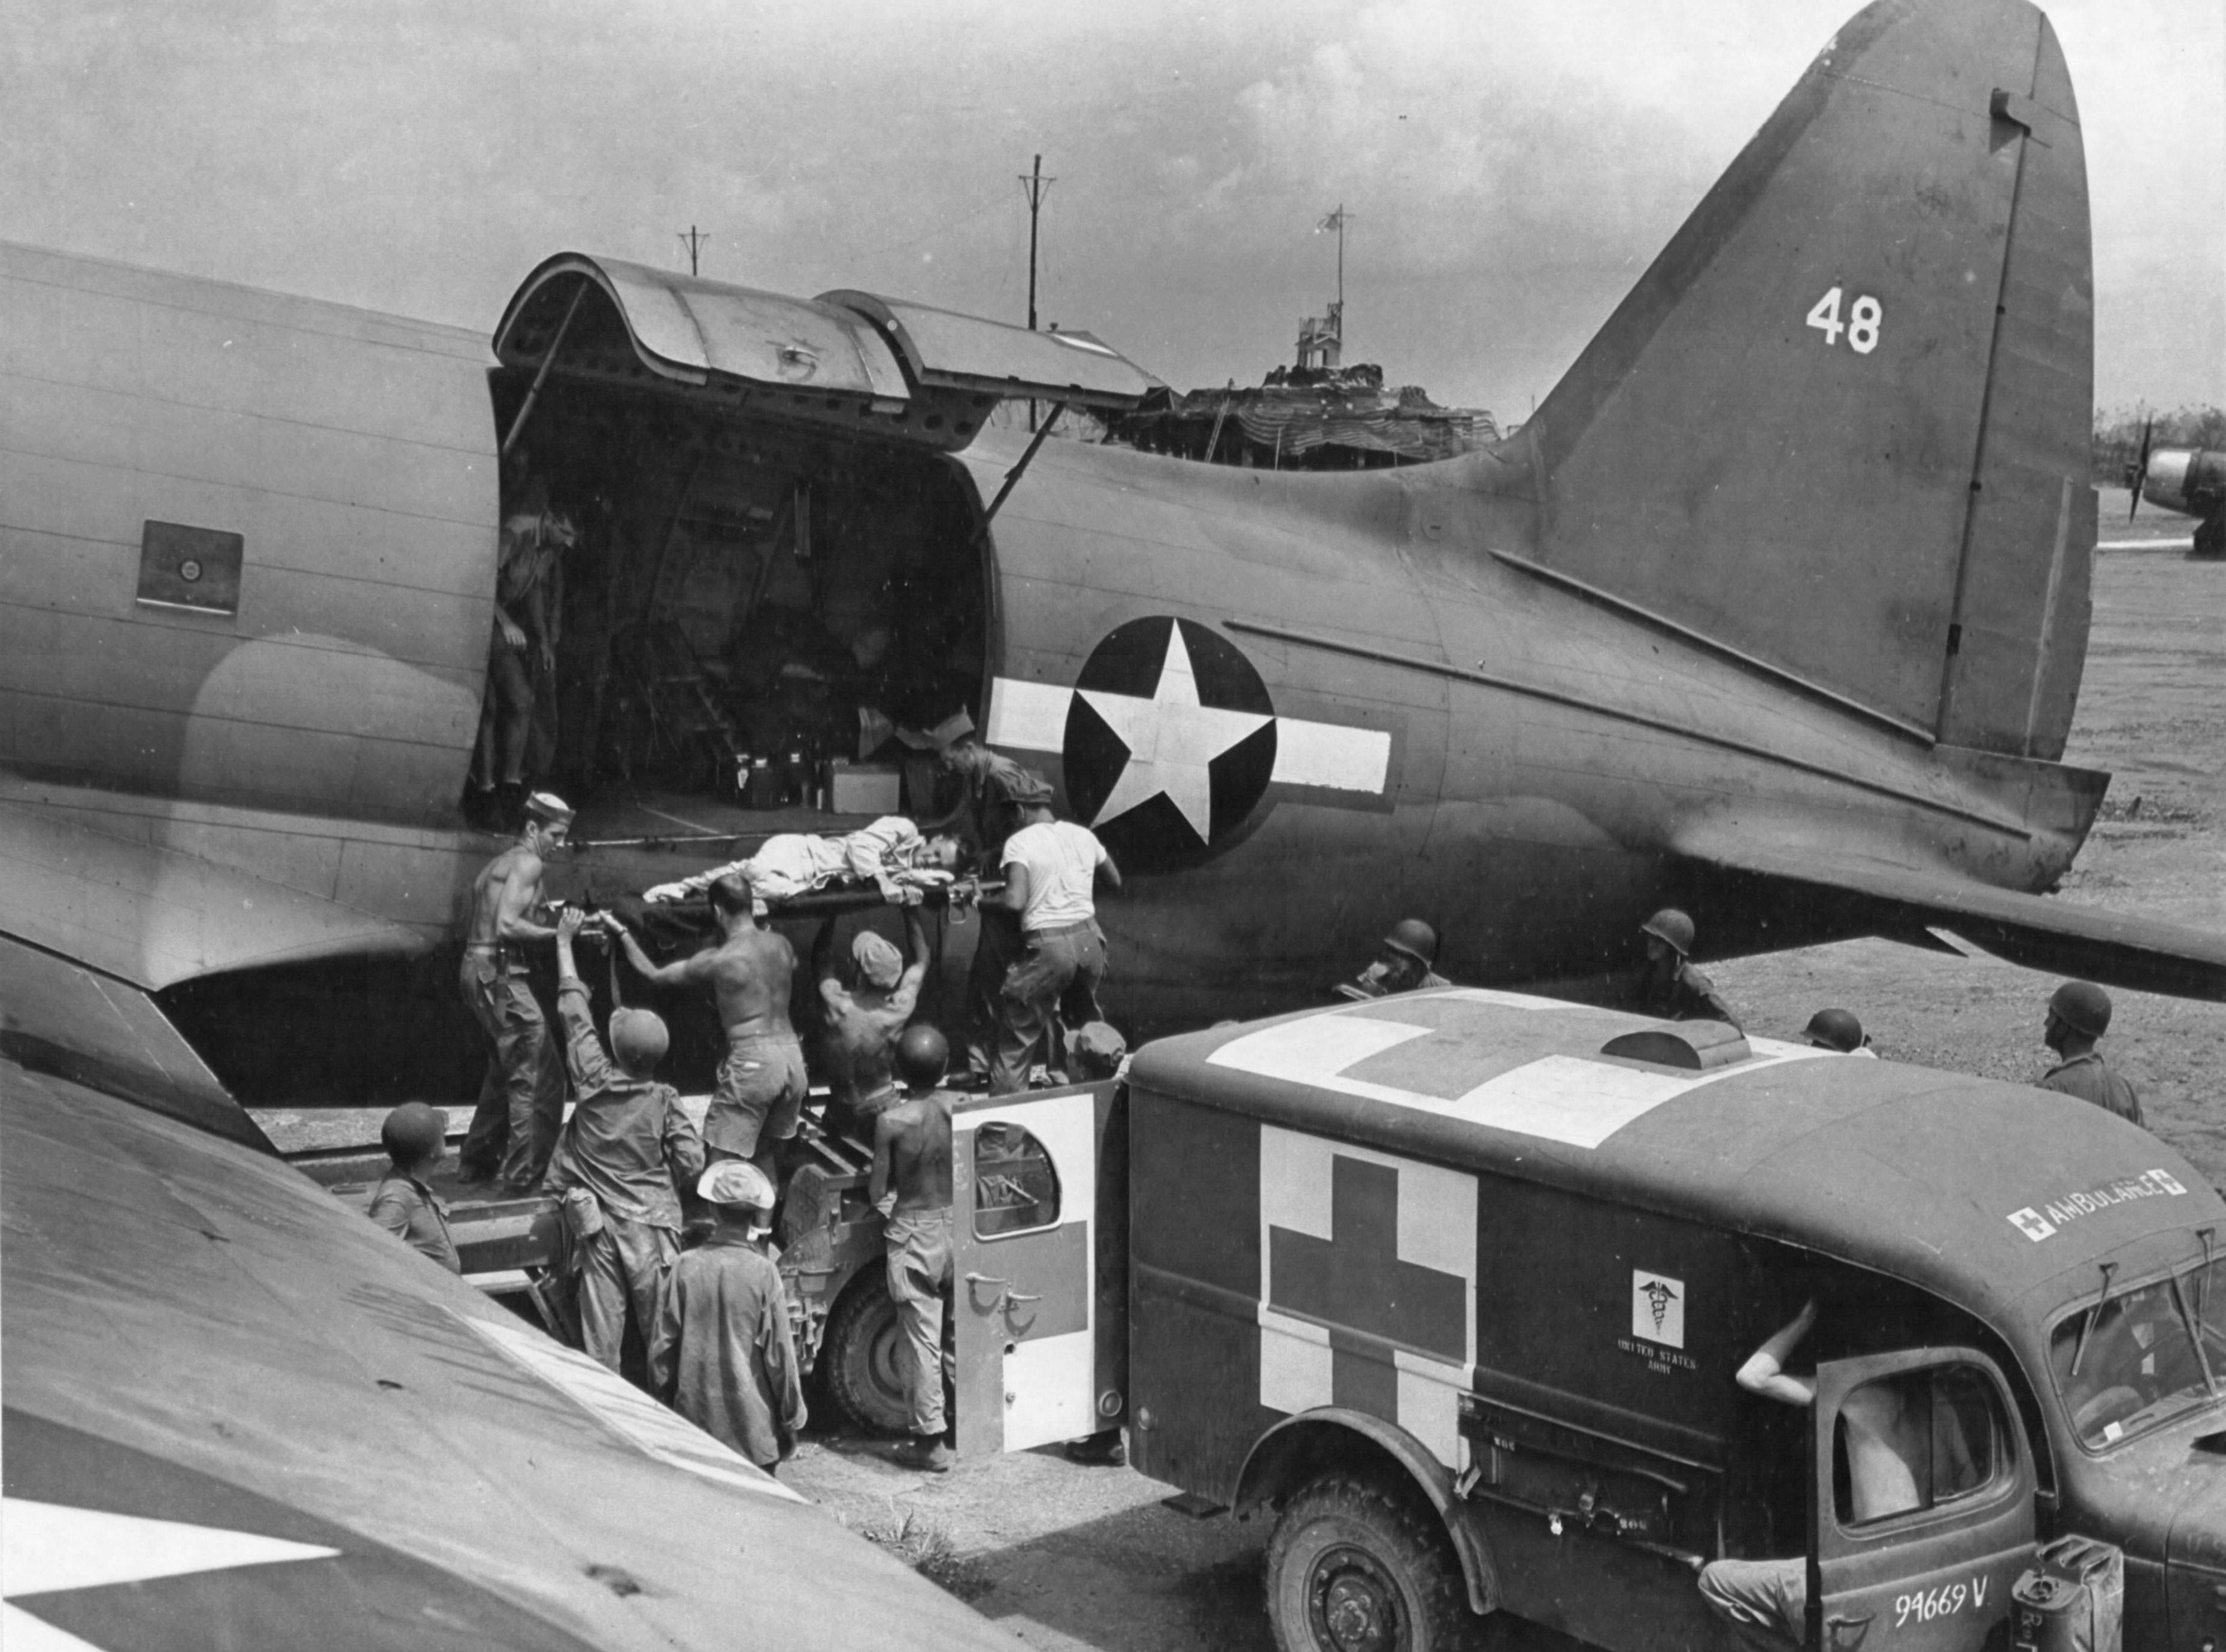 A Marine on Saipan was transferred to an R5C-1 Commando aircraft from a Dodge WC54 3/4-ton field ambulance for transfer to Hawaii, 1944; note the Jeep in between